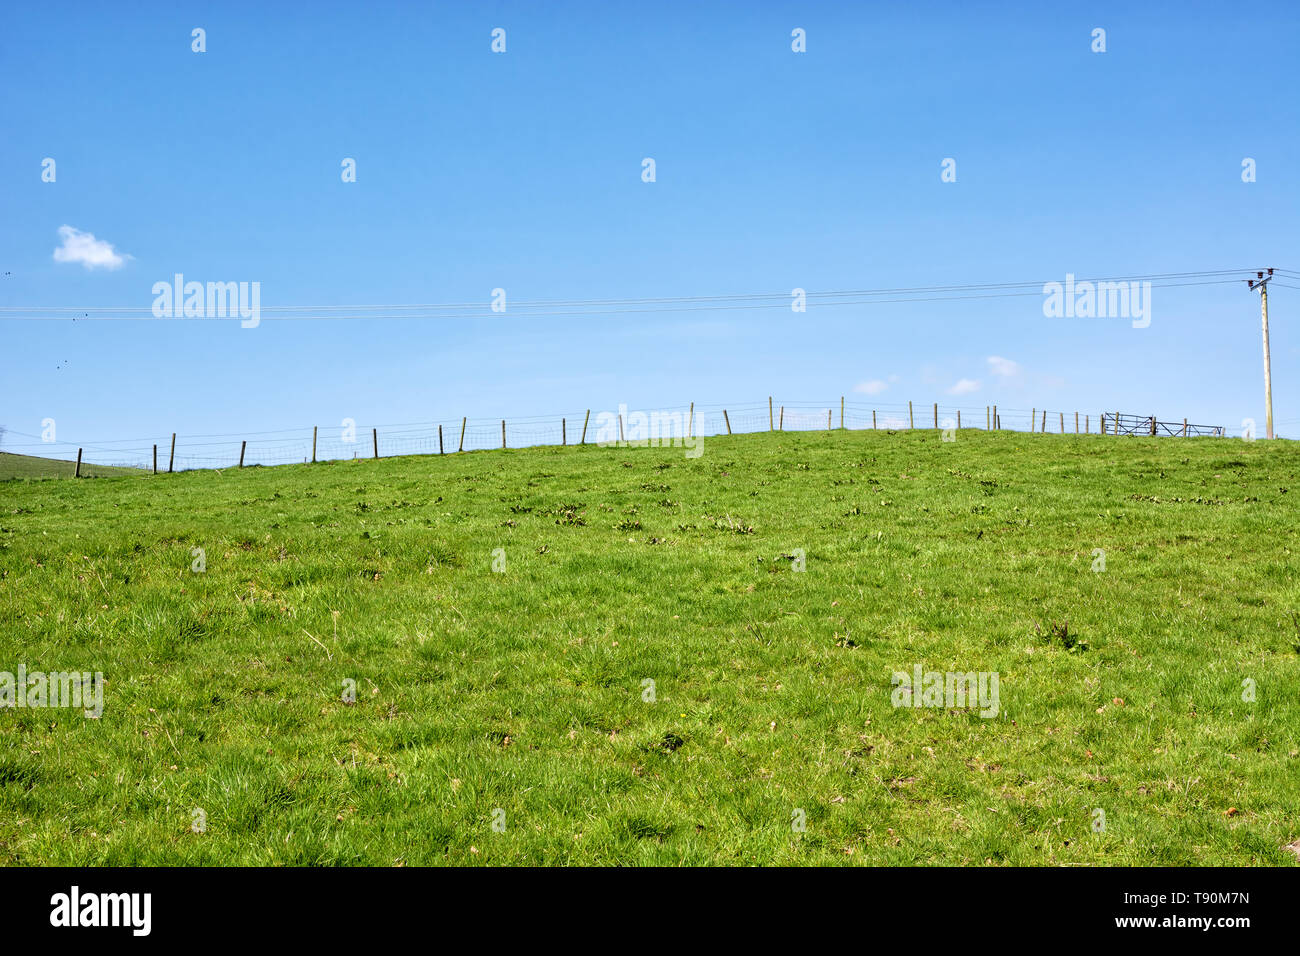 Fence-lined green field under the beautiful blue sky in Scotland, UK Stock Photo